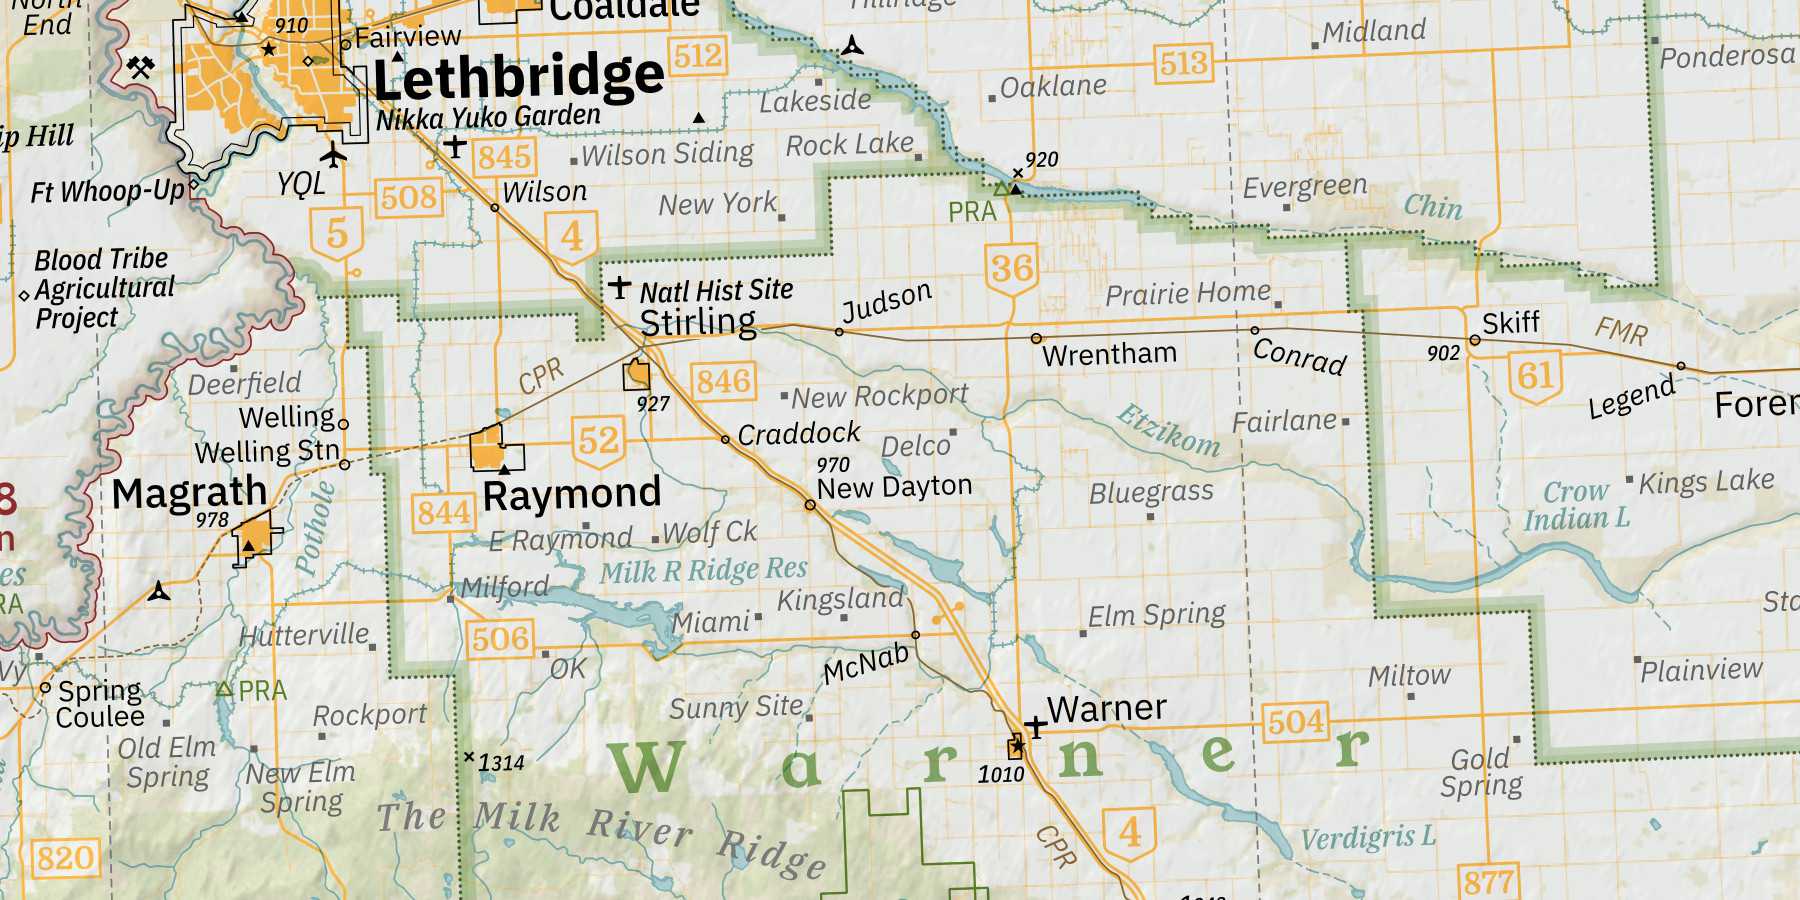 A large number of gray dots can be seen south of Lethbridge.